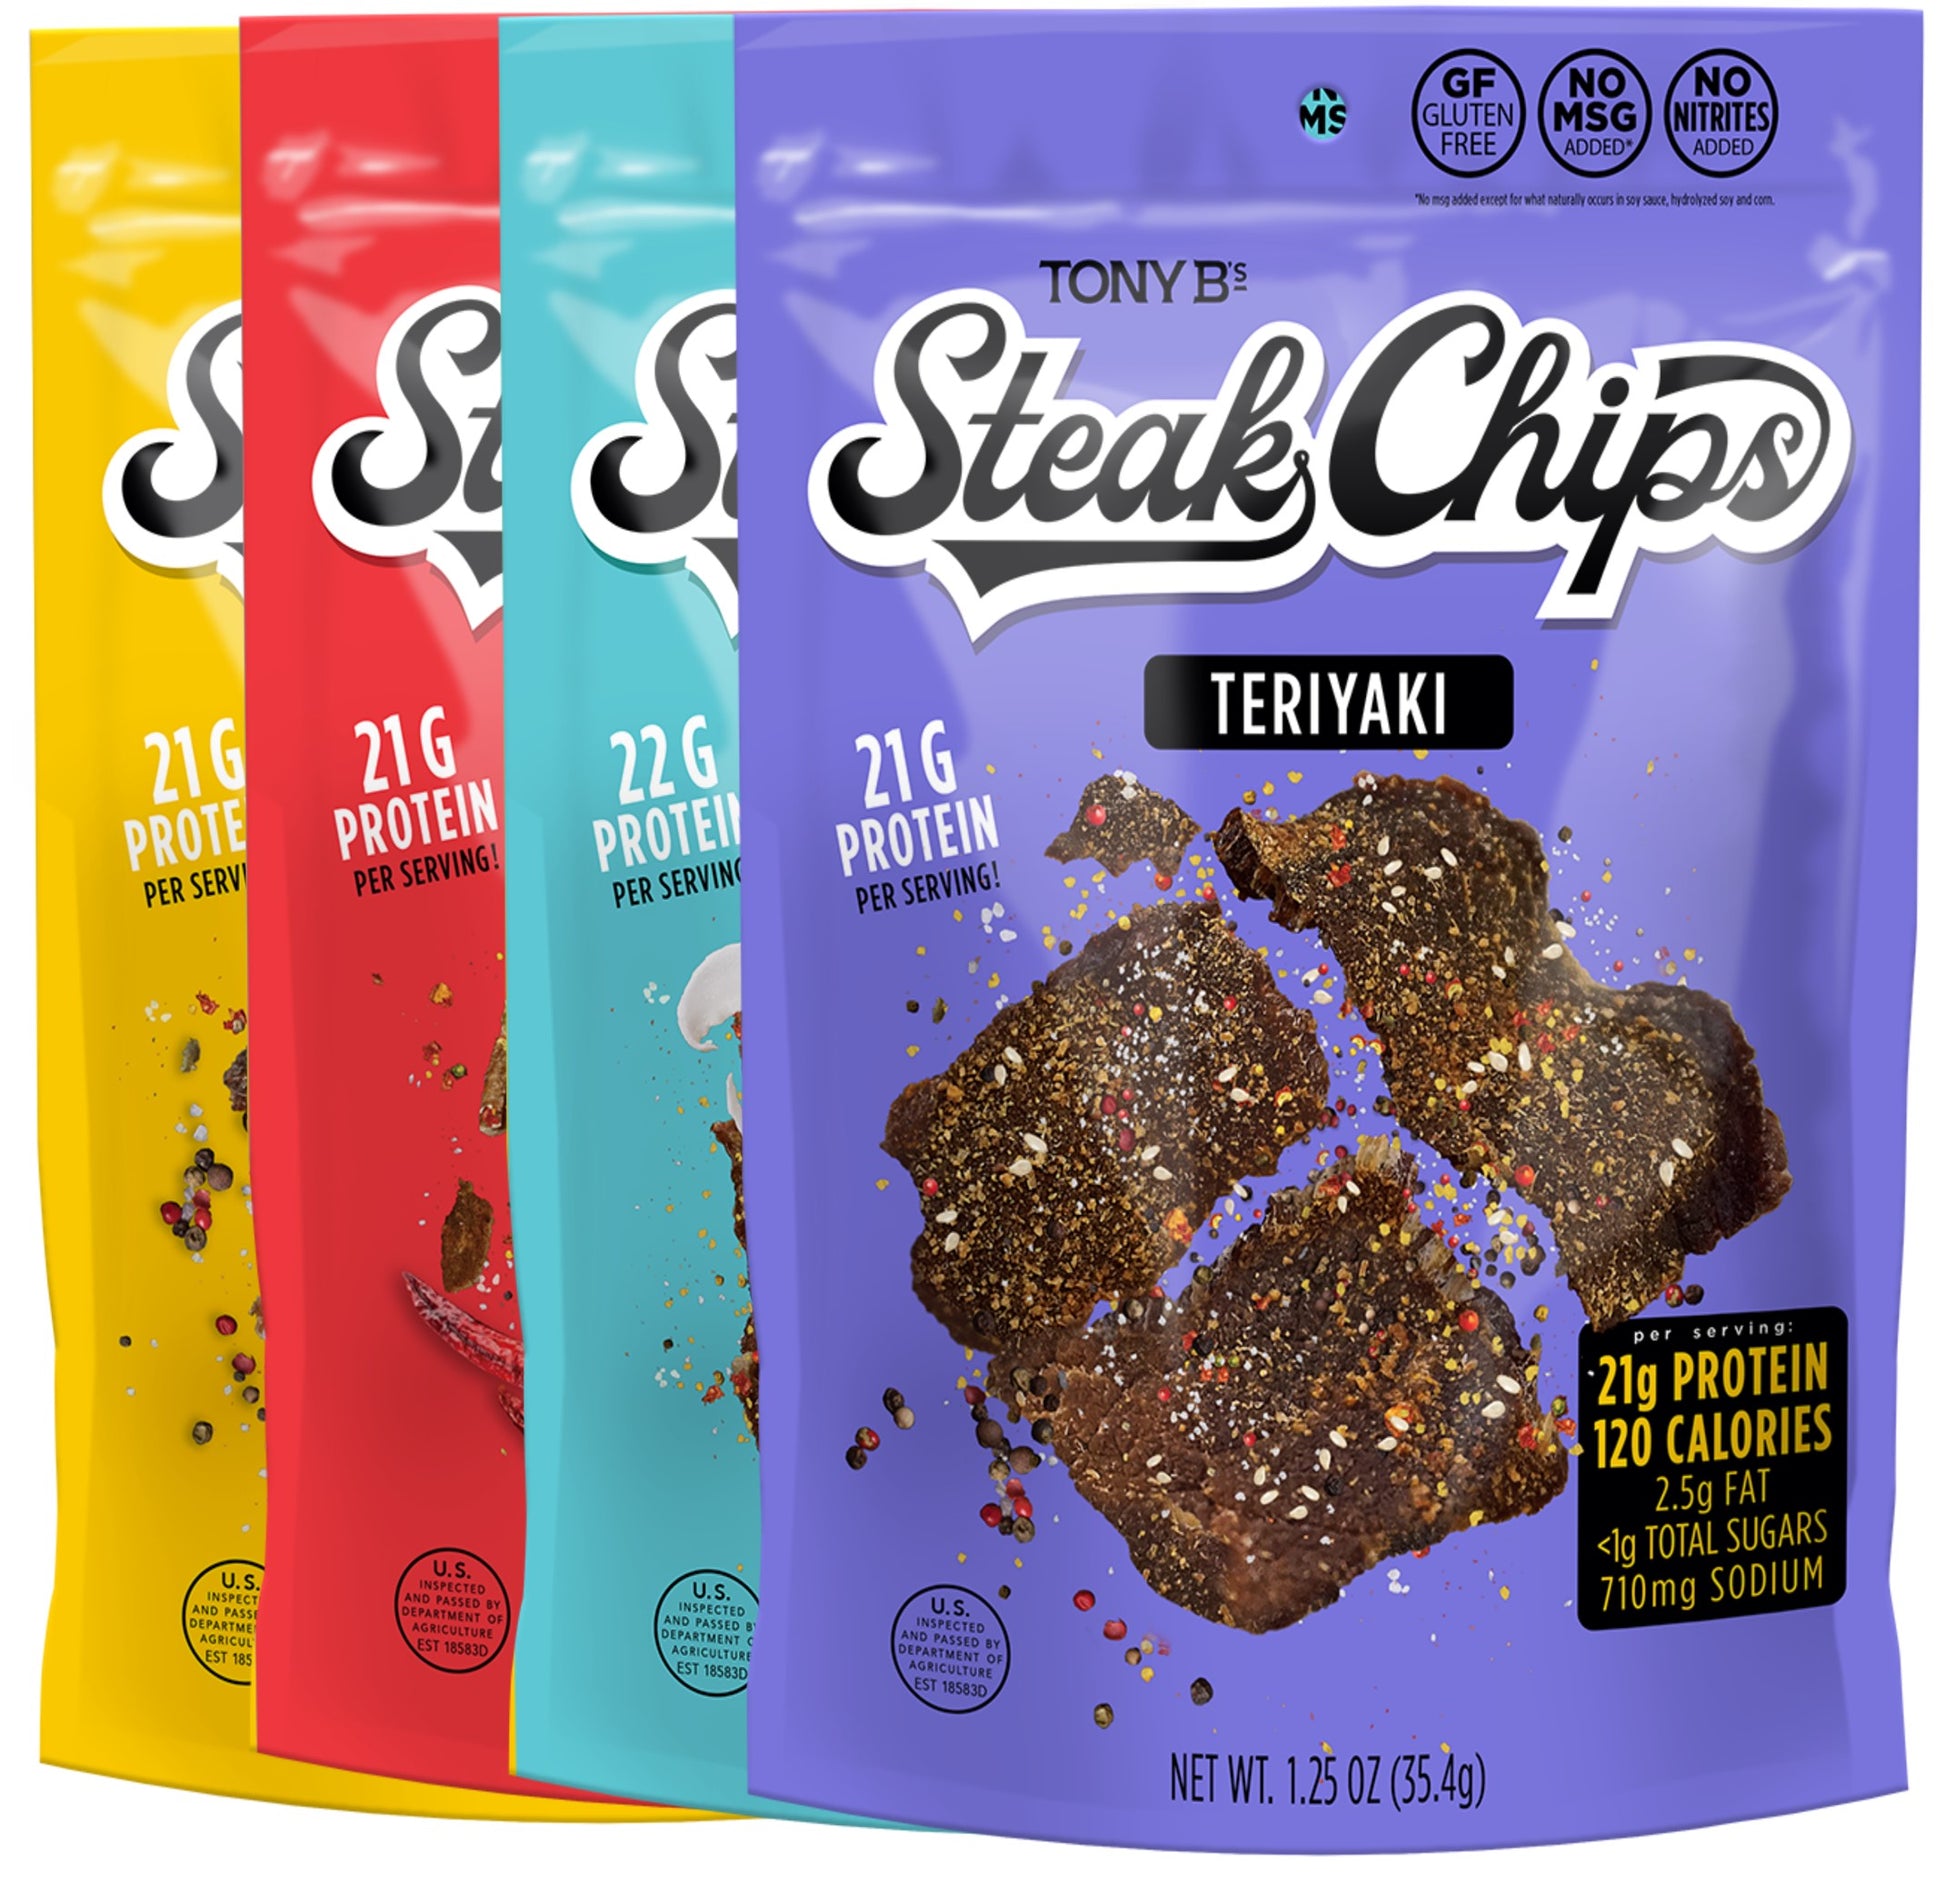 KETO SNACKS VARIETY PACK 30 Count) Gluten Free, High Protein Low